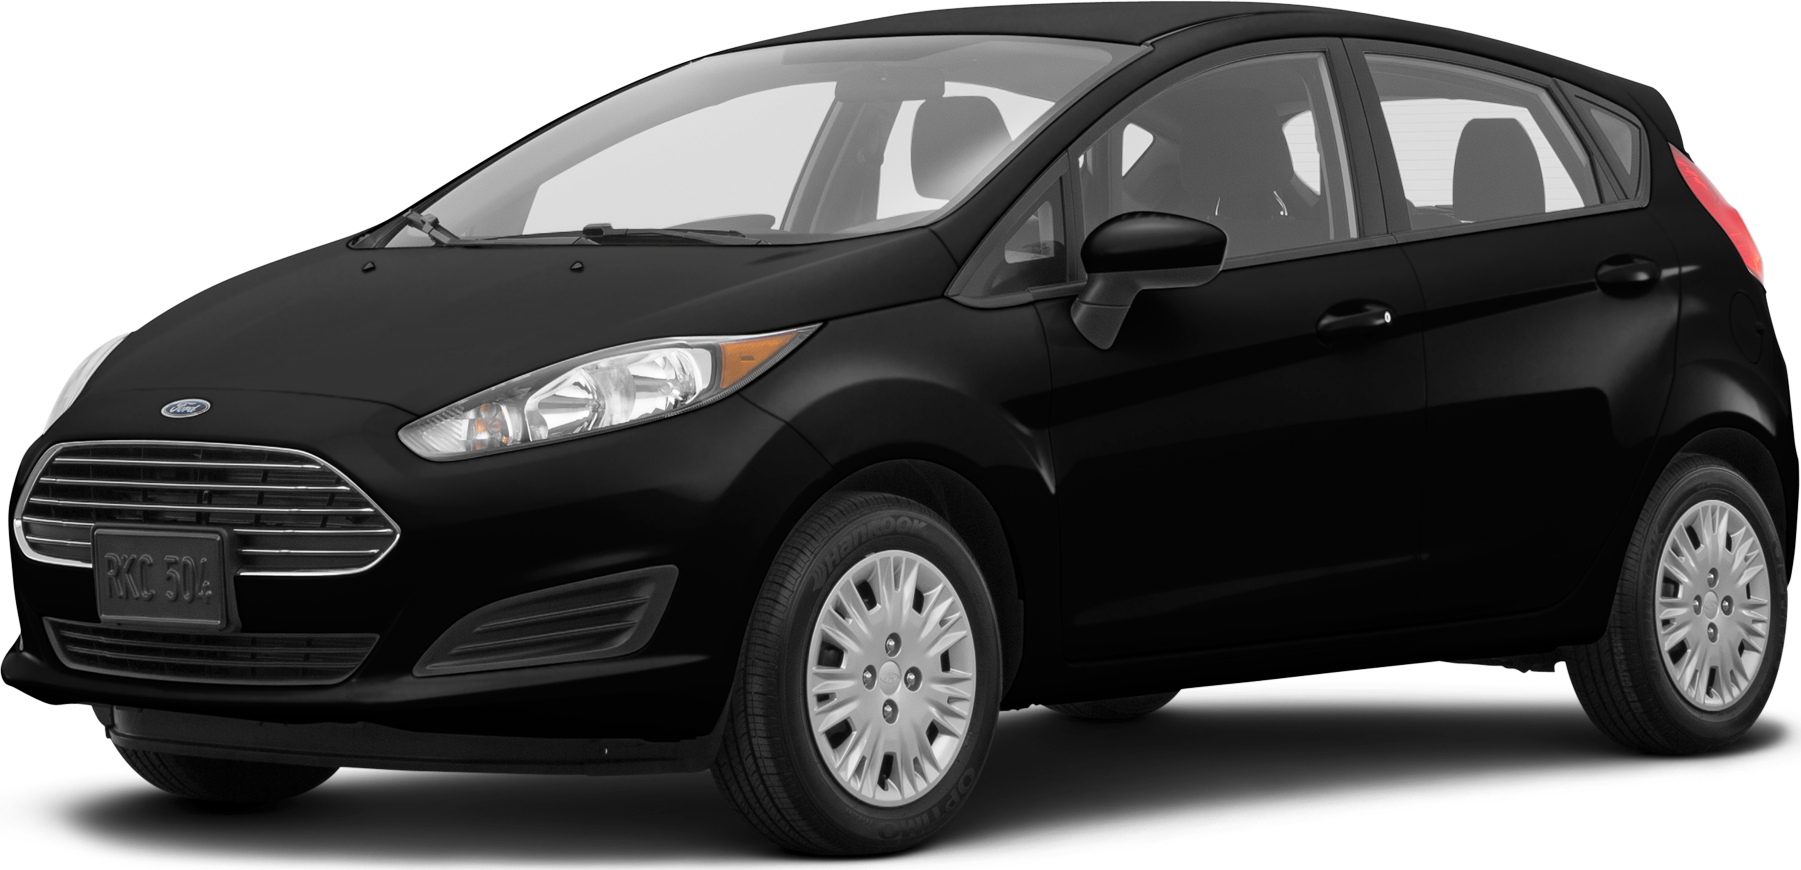 https://file.kelleybluebookimages.com/kbb/base/evox/CP/10857/2018-Ford-Fiesta-front_10857_032_1801x870_G1_cropped.png